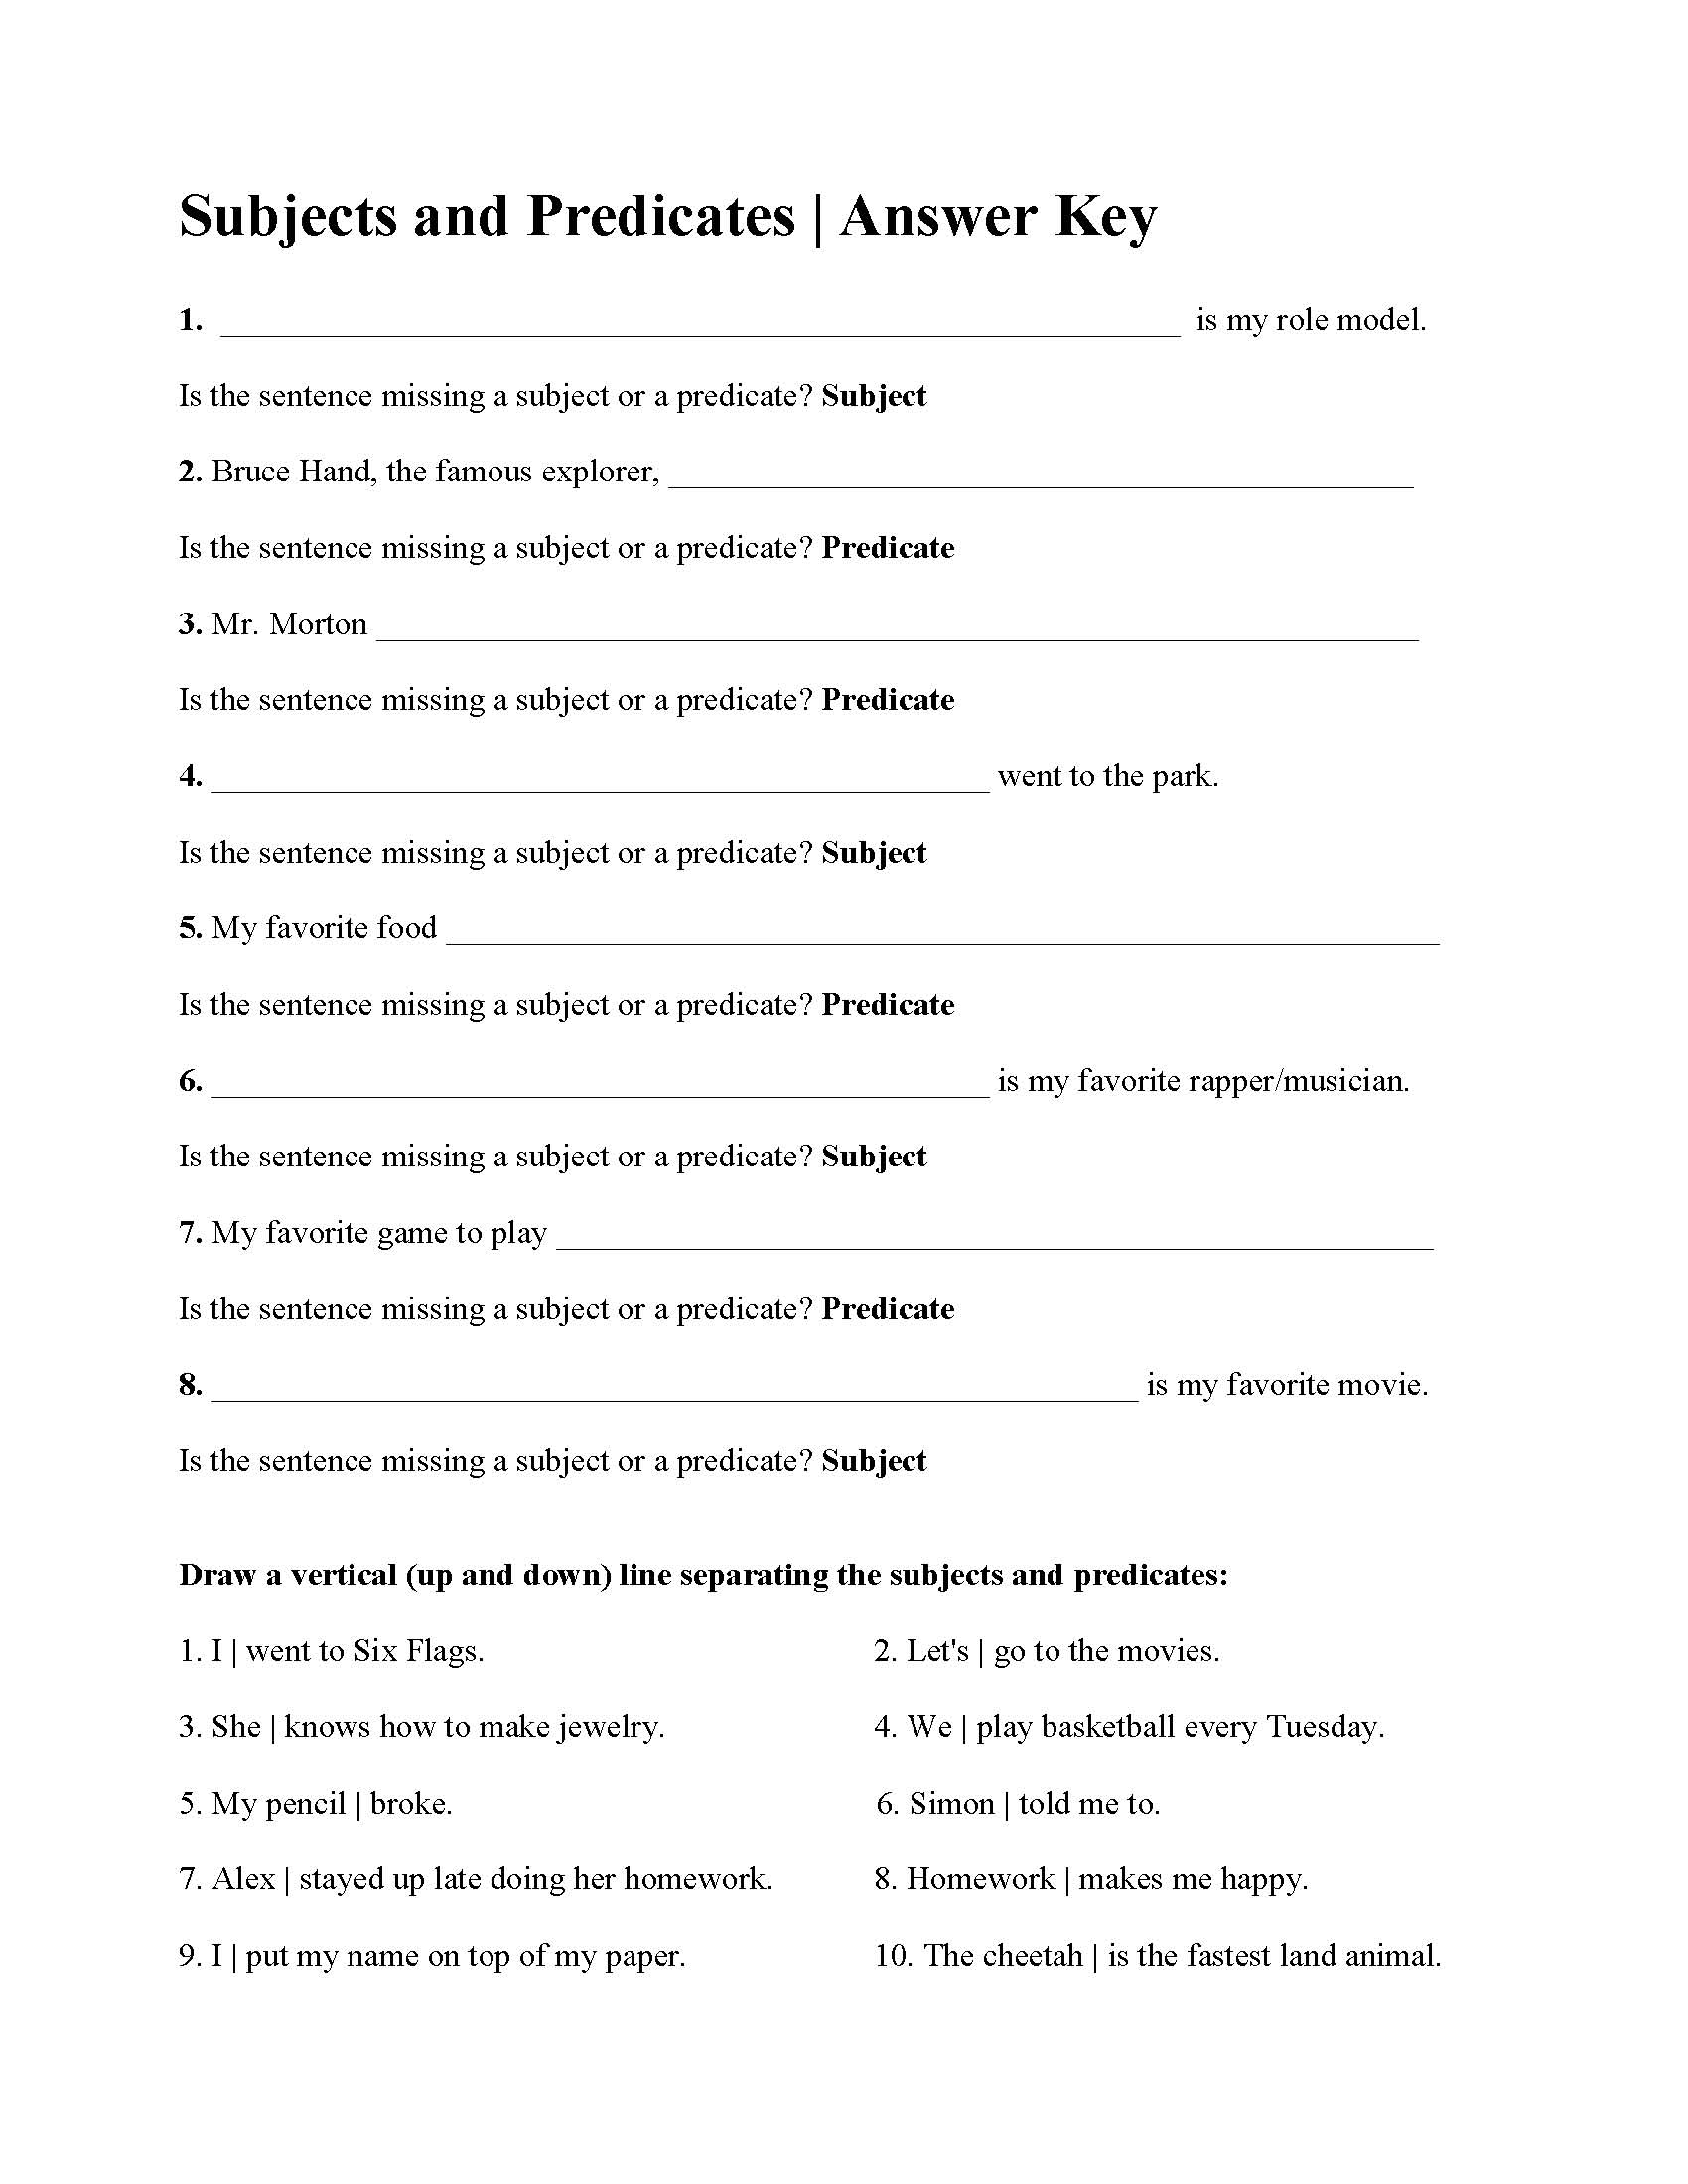 This is a preview image of Subjects and Predicates Worksheet 1. Click on it to enlarge it or view the source file.